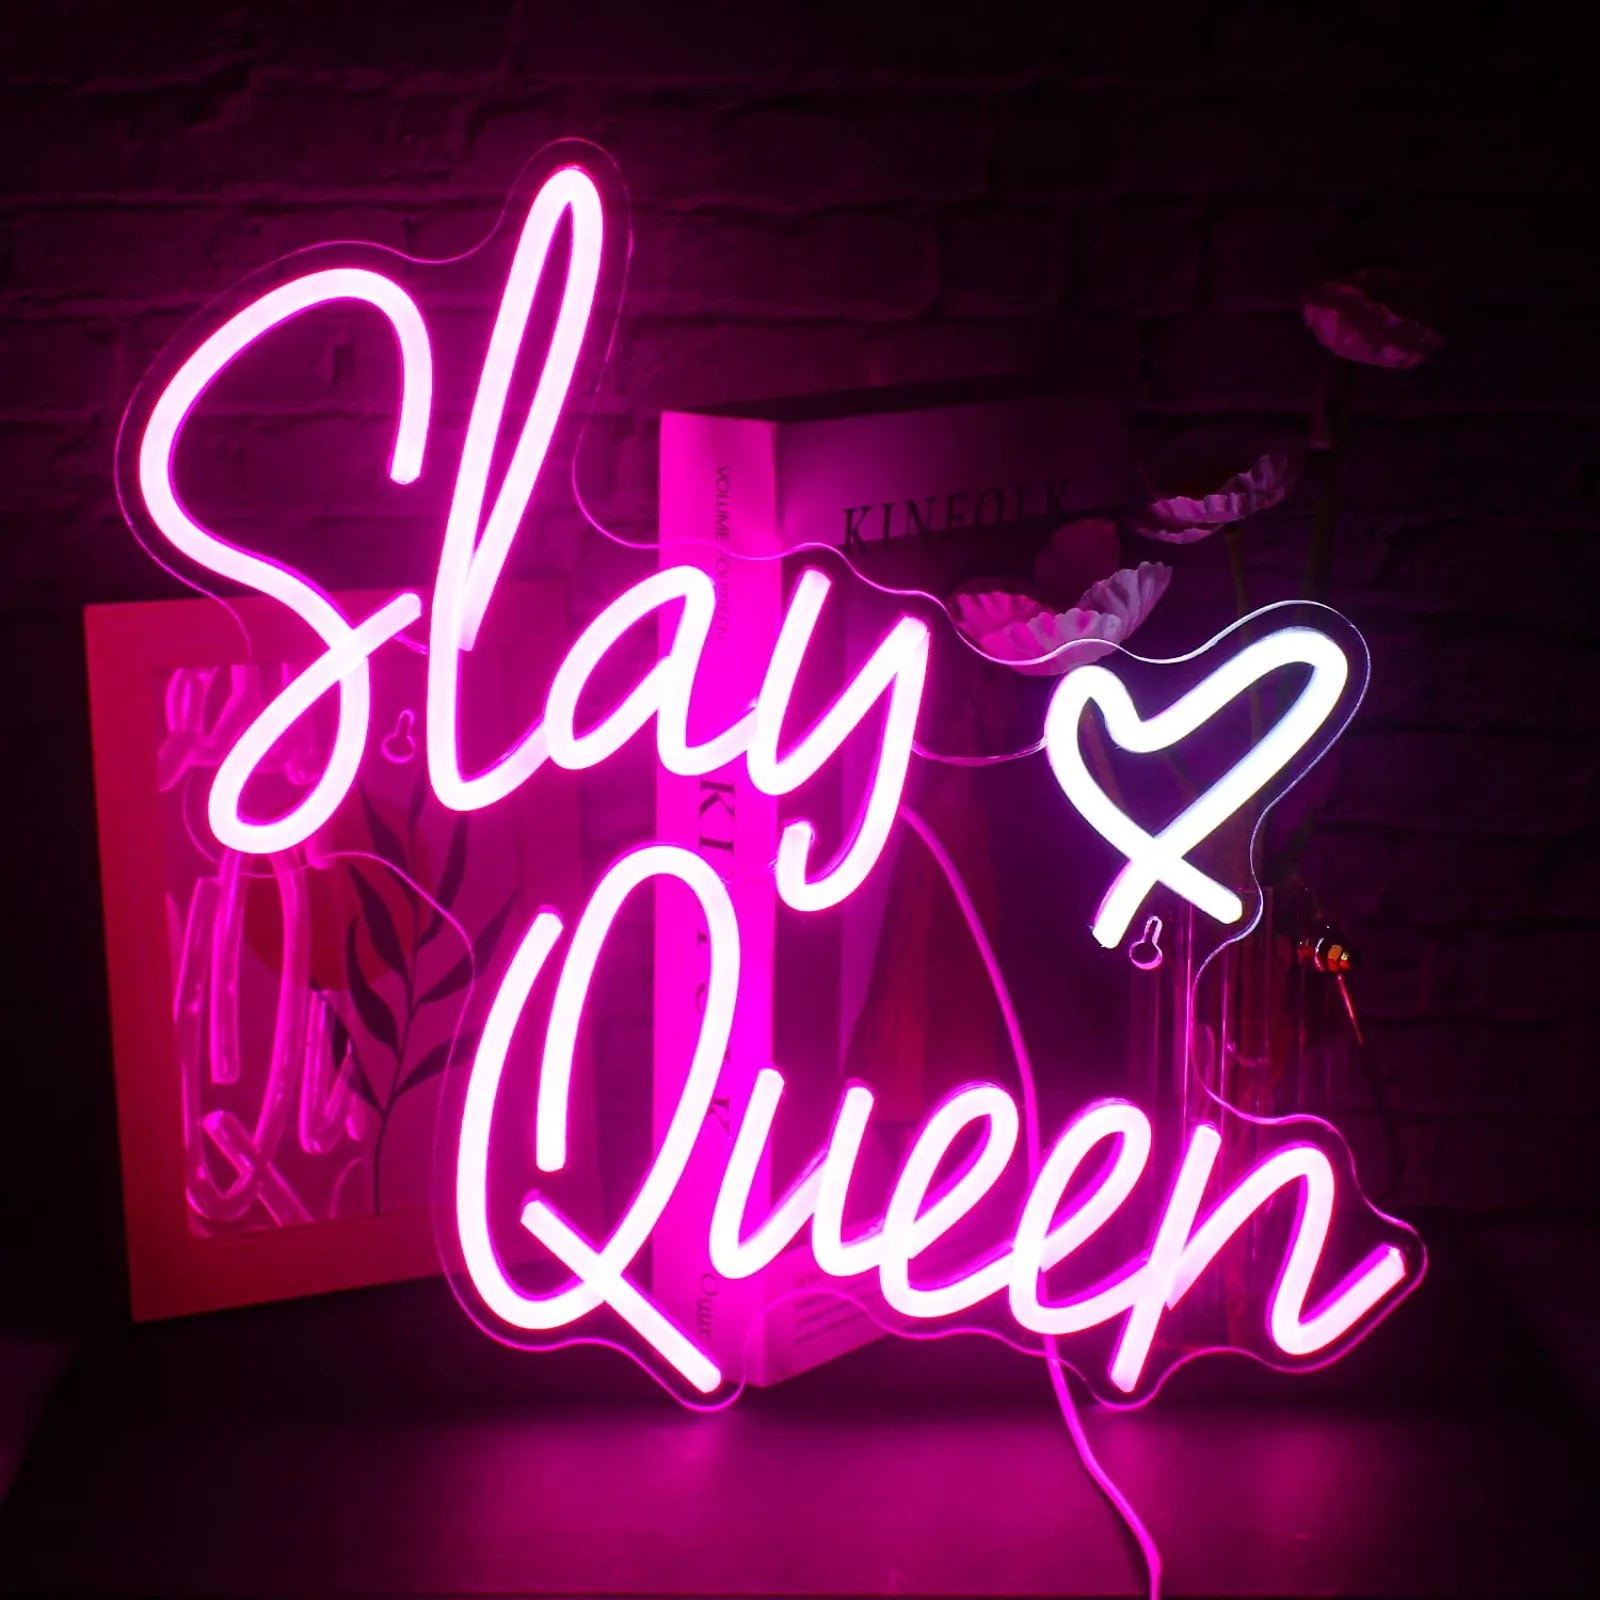 

Pink White LED Neon Light Up Signs for Wall Decor Neon Light for Bedroom Preppy Girl Aesthetic Room Dorm Decor Y2k Party Gifts